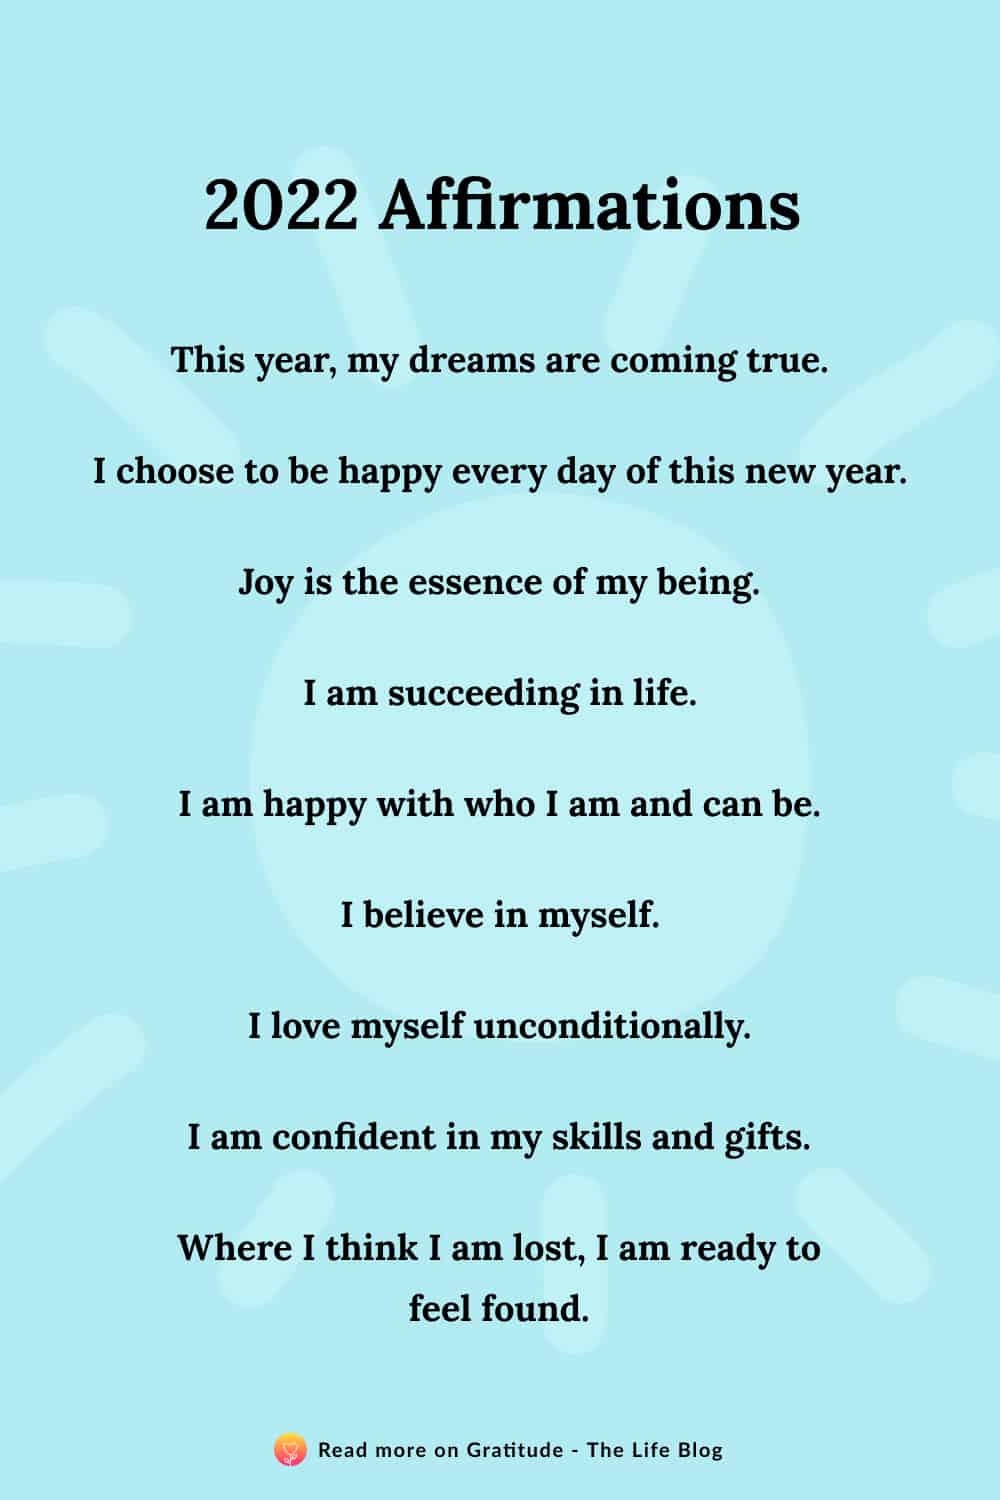 Image with list of 2022 affirmations